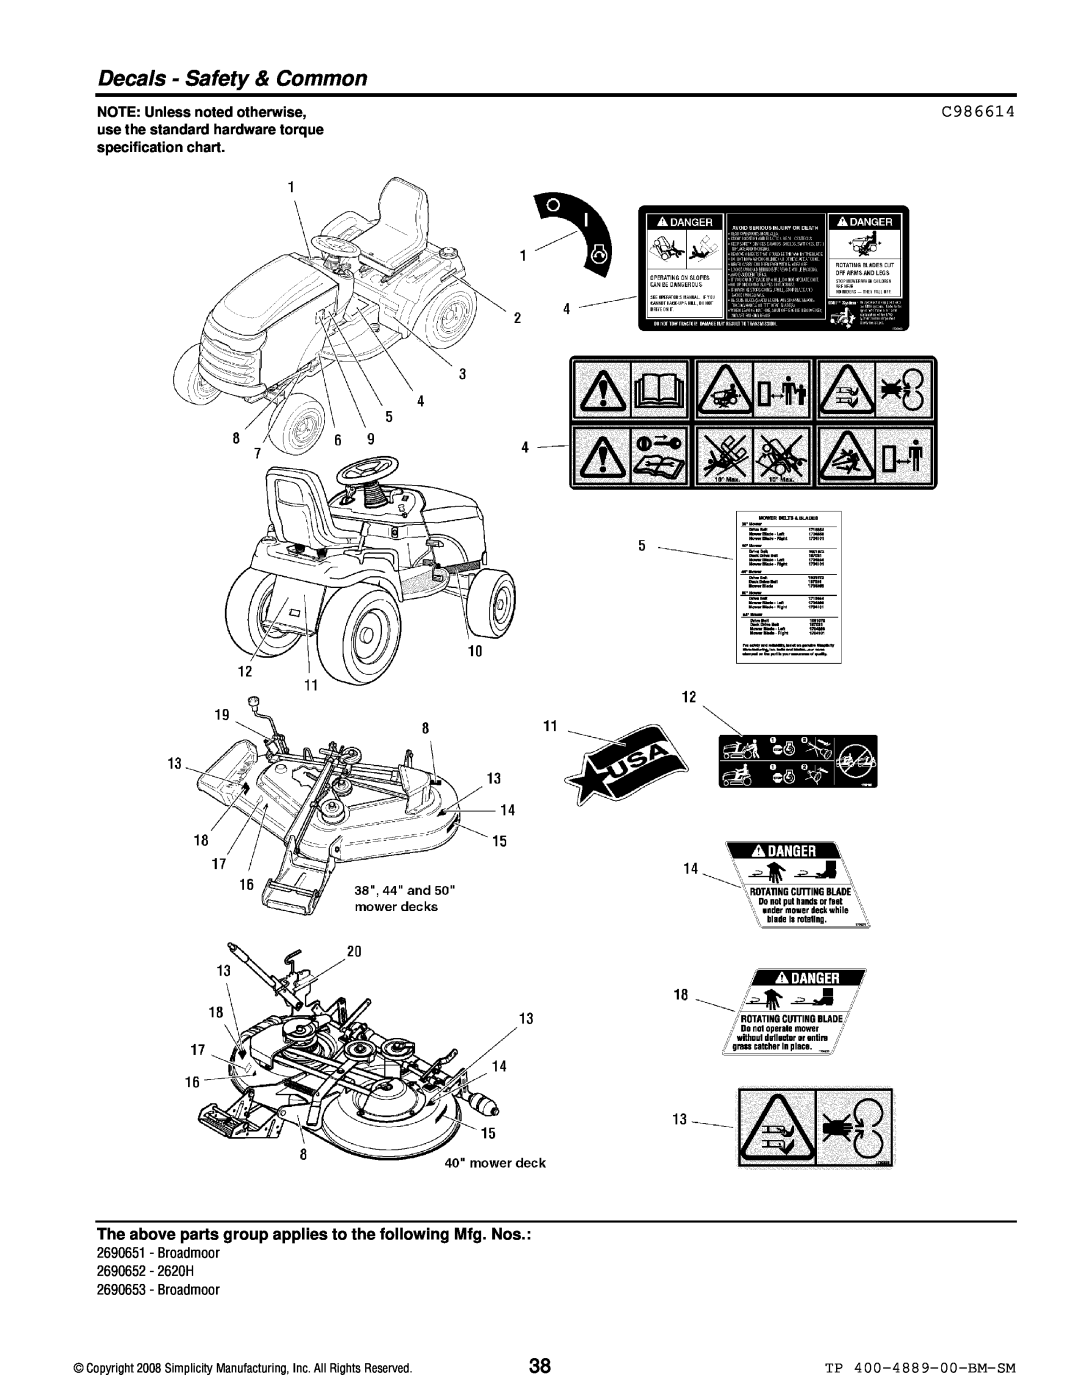 Simplicity 2600 Series manual Decals - Safety & Common, C986614, TP 400-4889-00-BM-SM, NOTE: Unless noted otherwise 